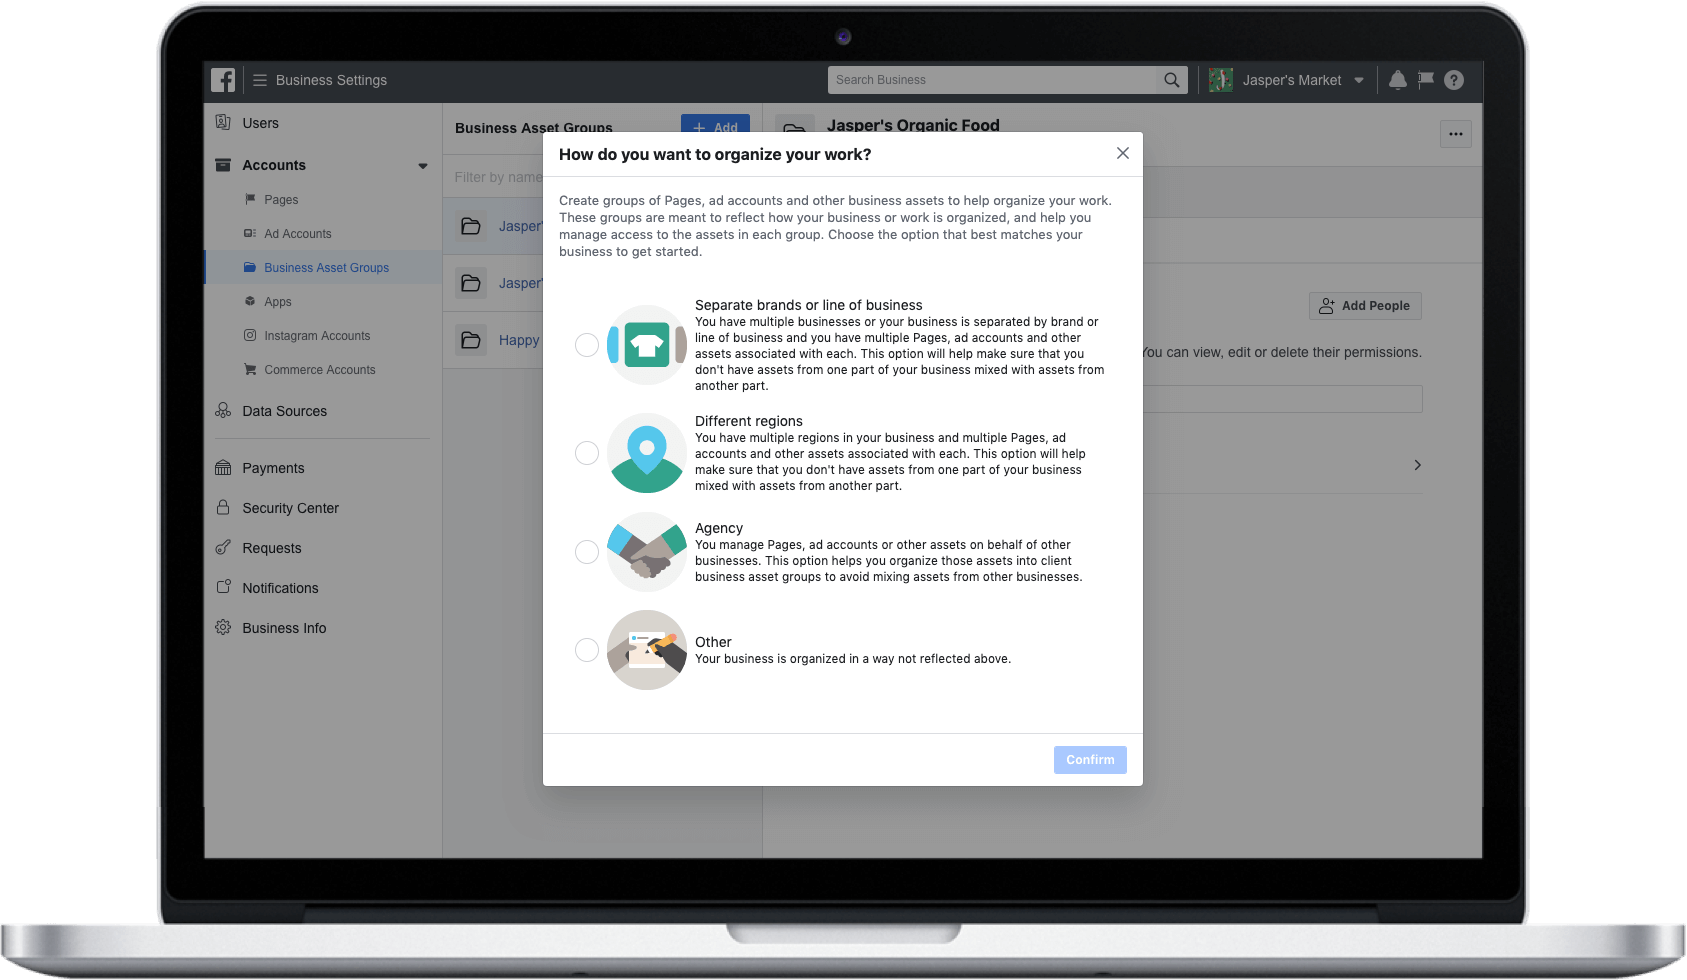 Facebook Business Manager redesign with bulk permissions management rolling out